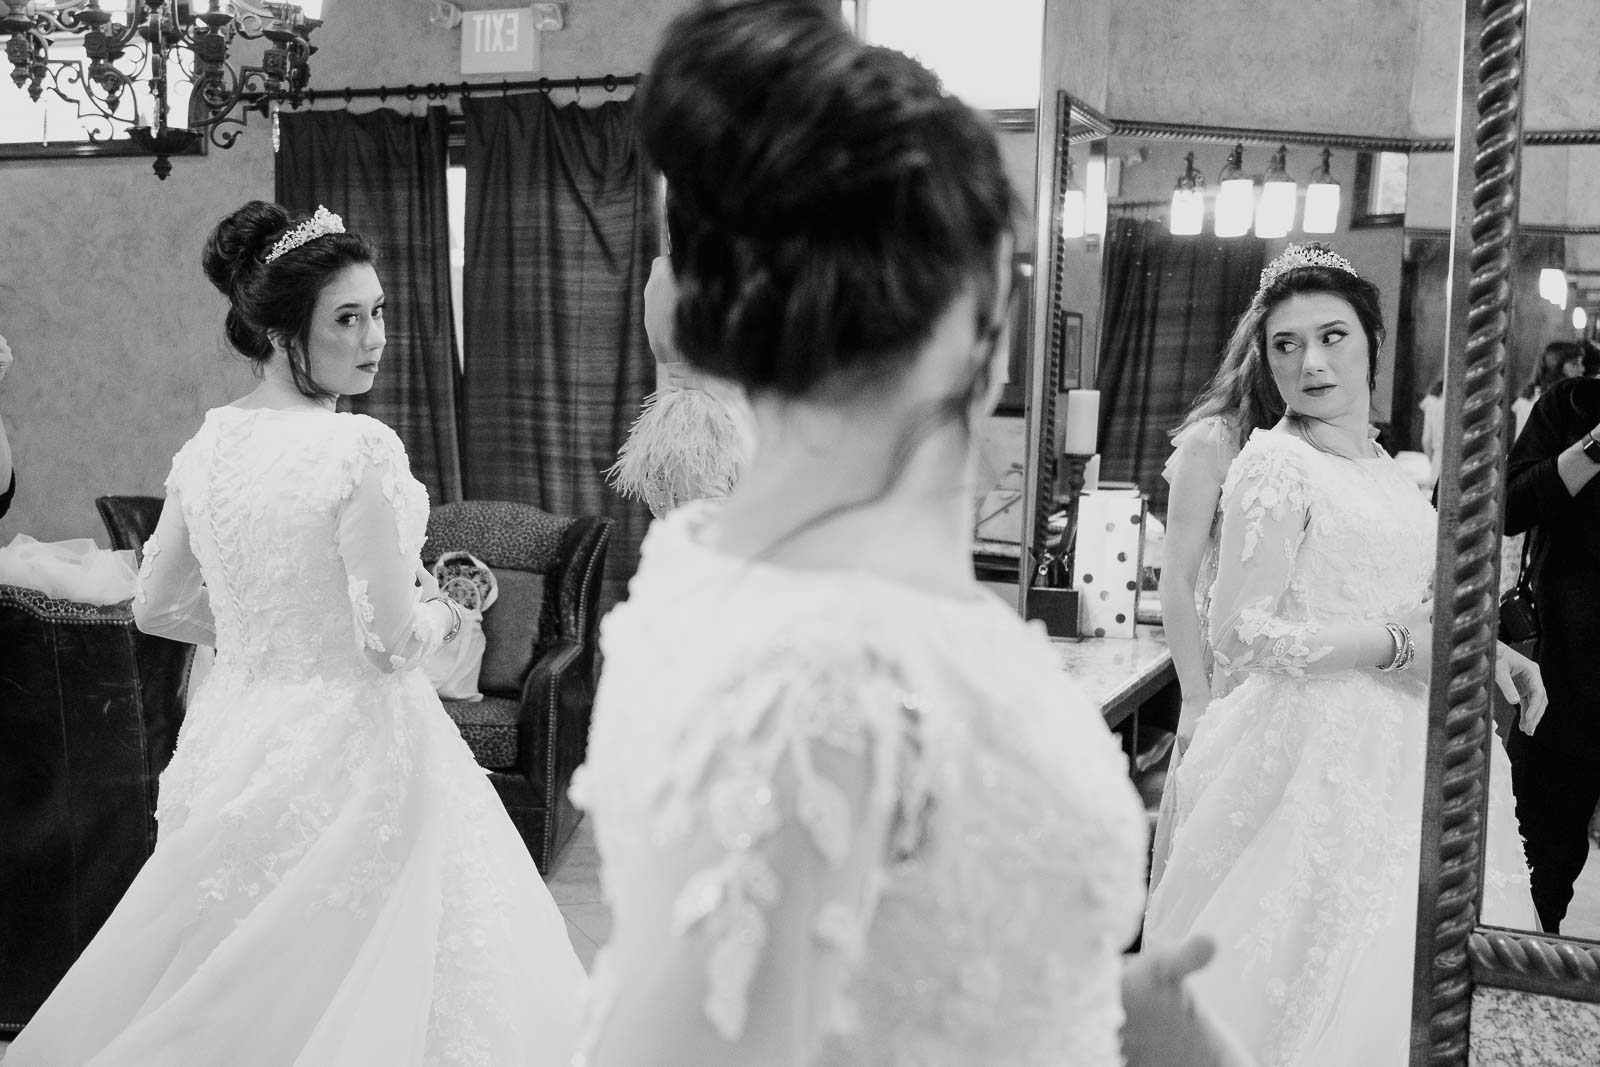 Busra, the bride  looks over his shoulder into the mirror and multiple reflections